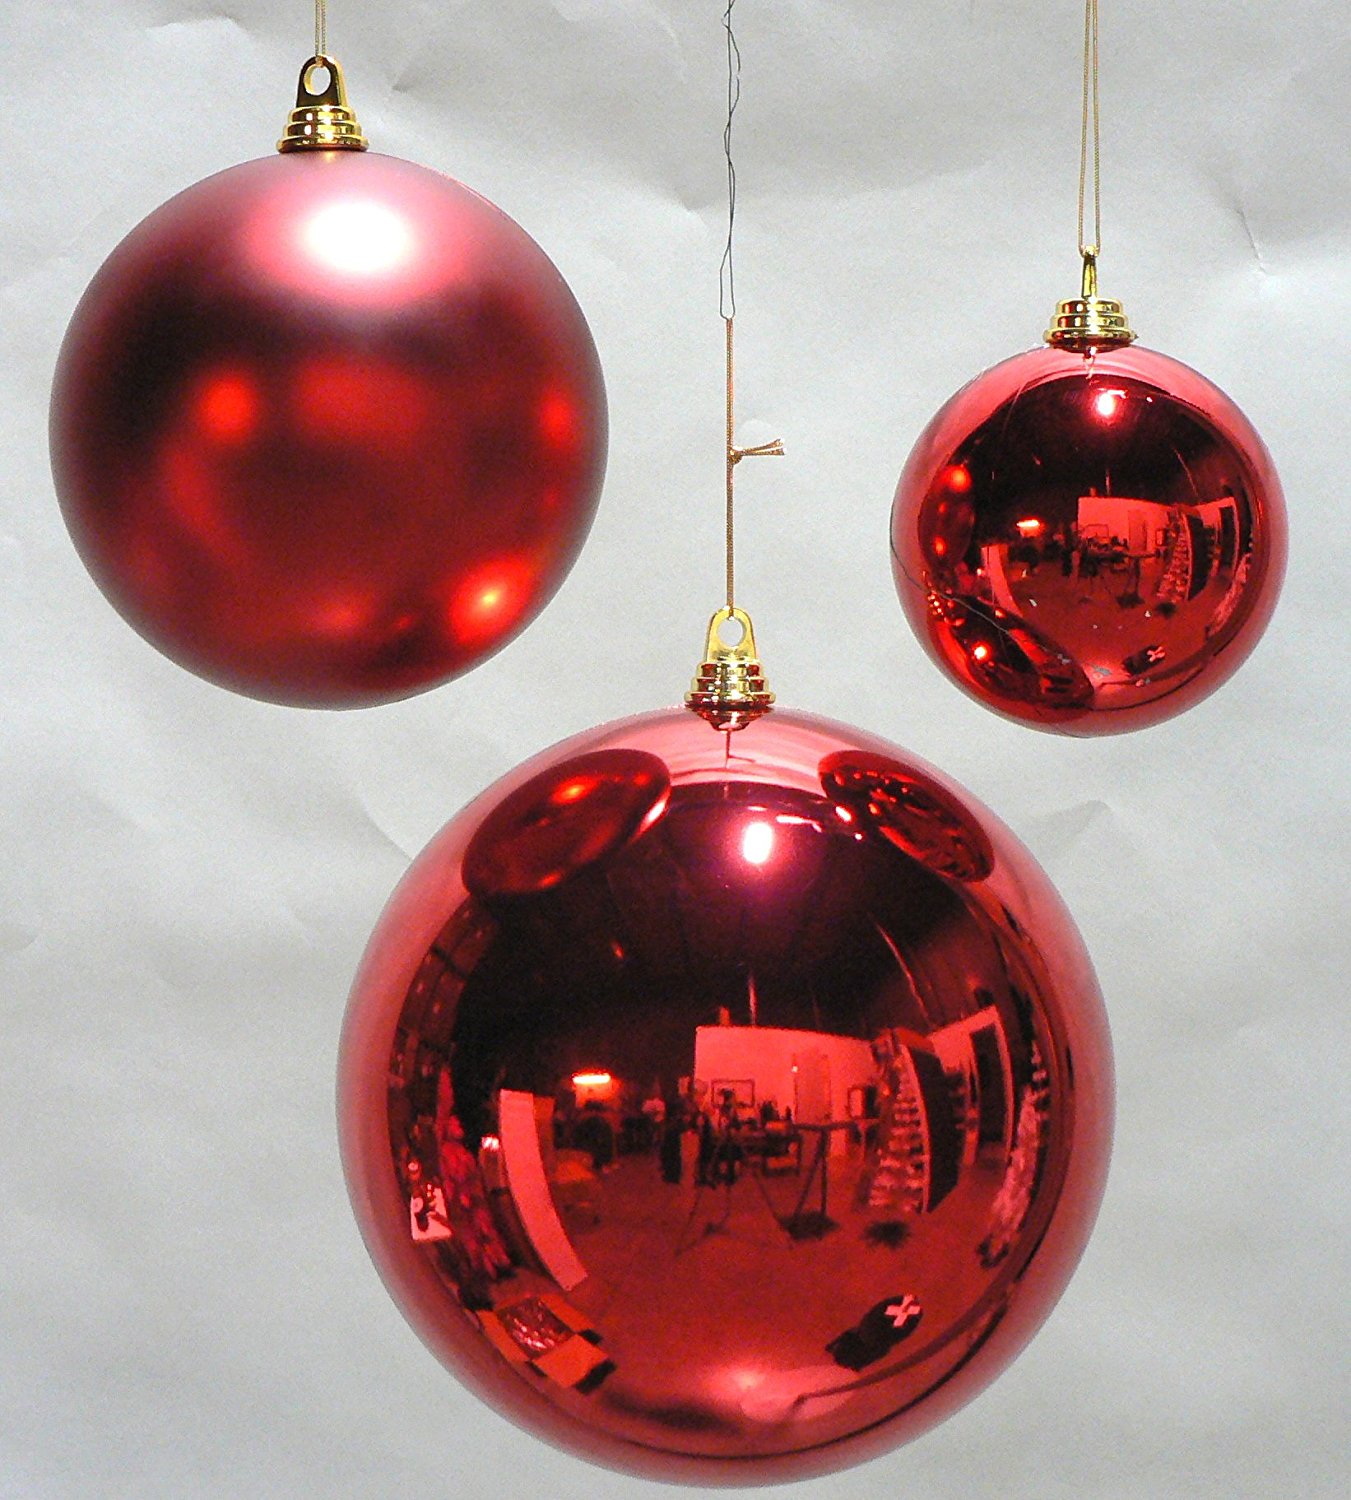 Amazon.com: 2 Large Shiny Red Christmas Ball Ornaments 12inch TWO ...